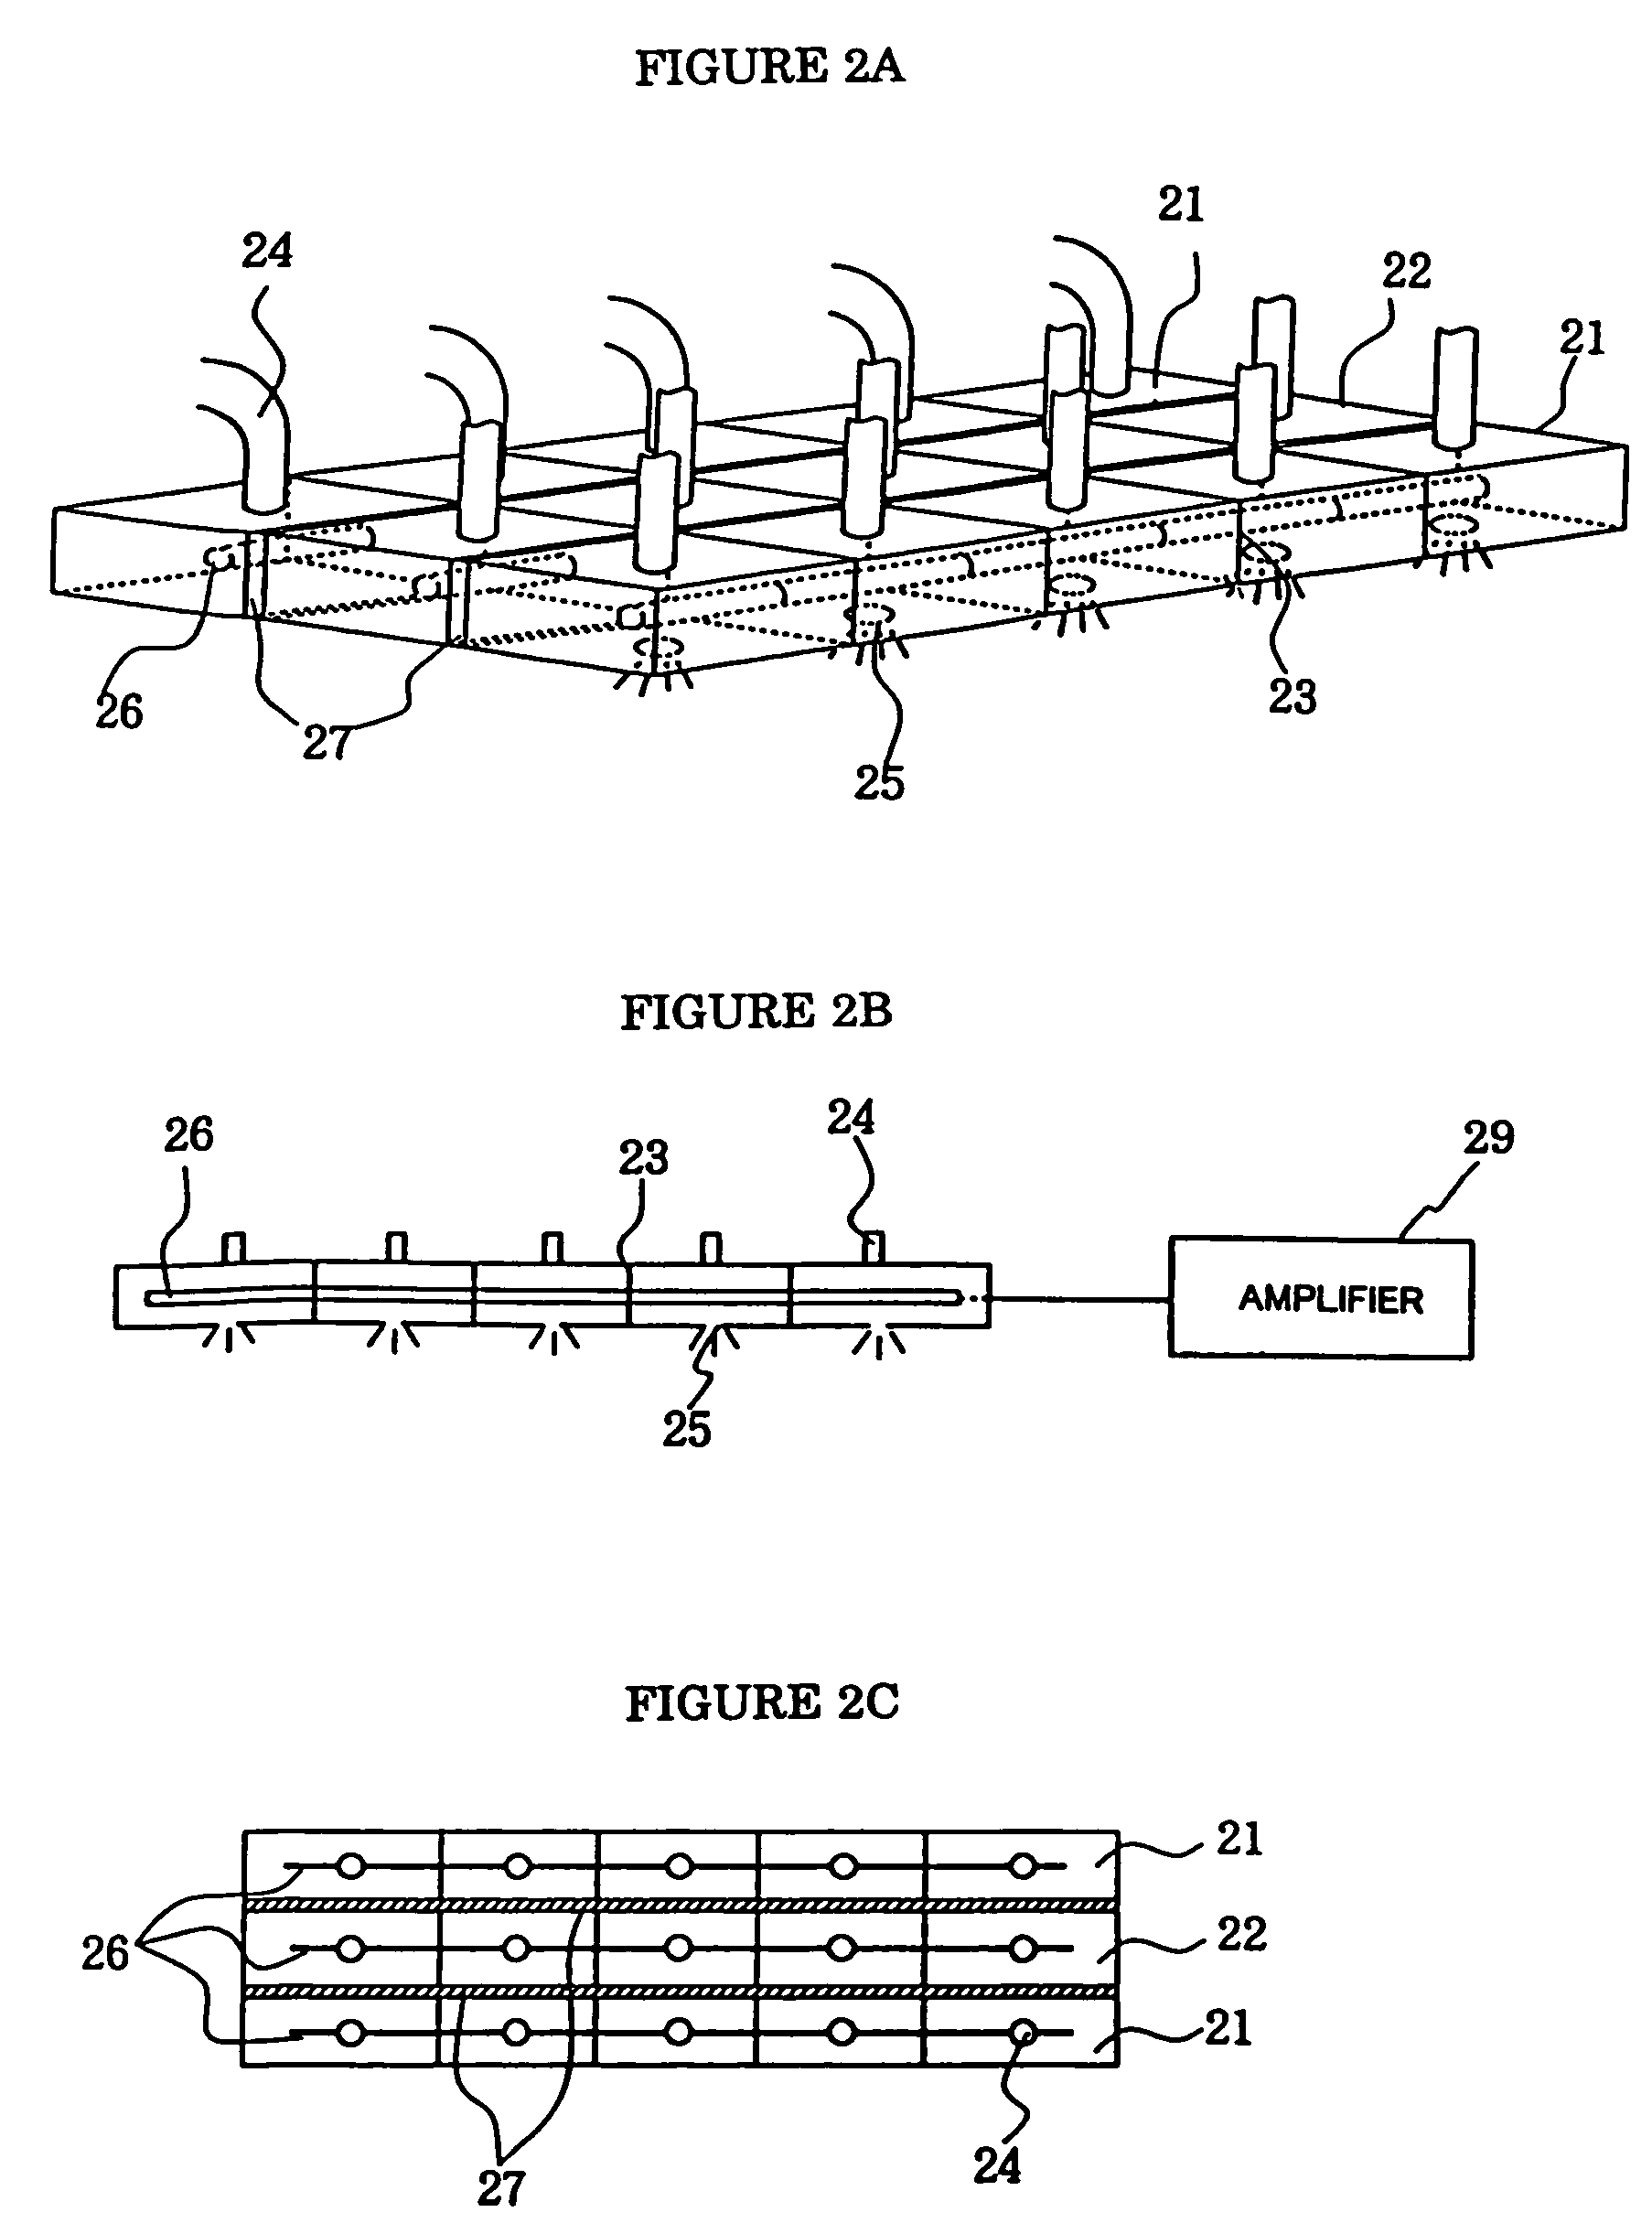 Substrate treatment process and apparatus